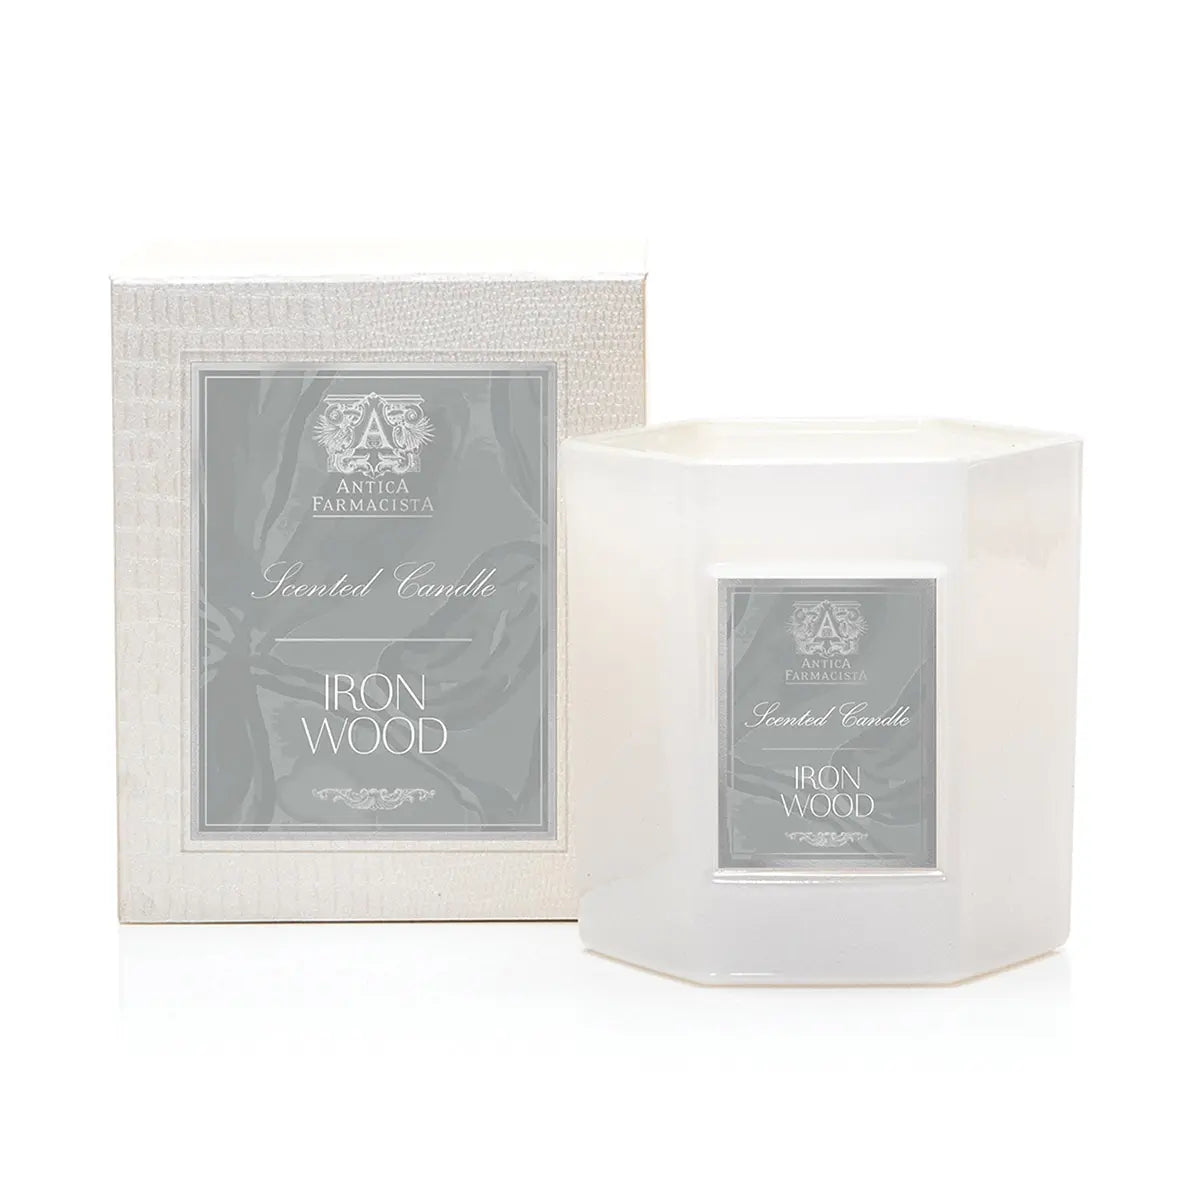 Antica Farmacista Iron Wood Scented Candle